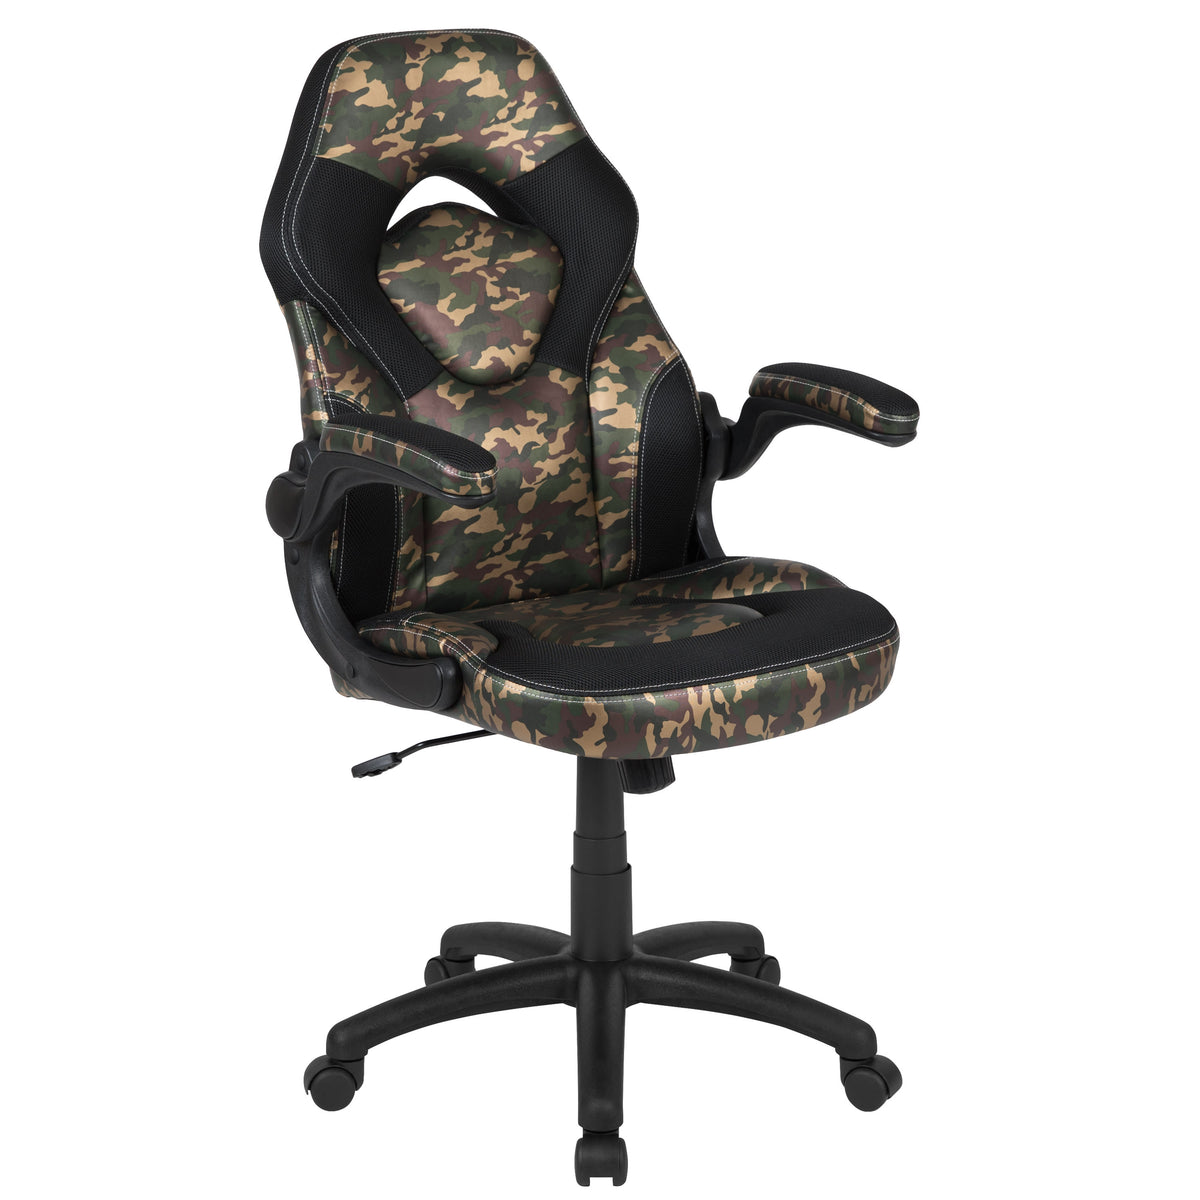 Camouflage |#| Black/Camo Gaming Desk Set with Cup Holder, Headphone Hook, and Monitor Stand